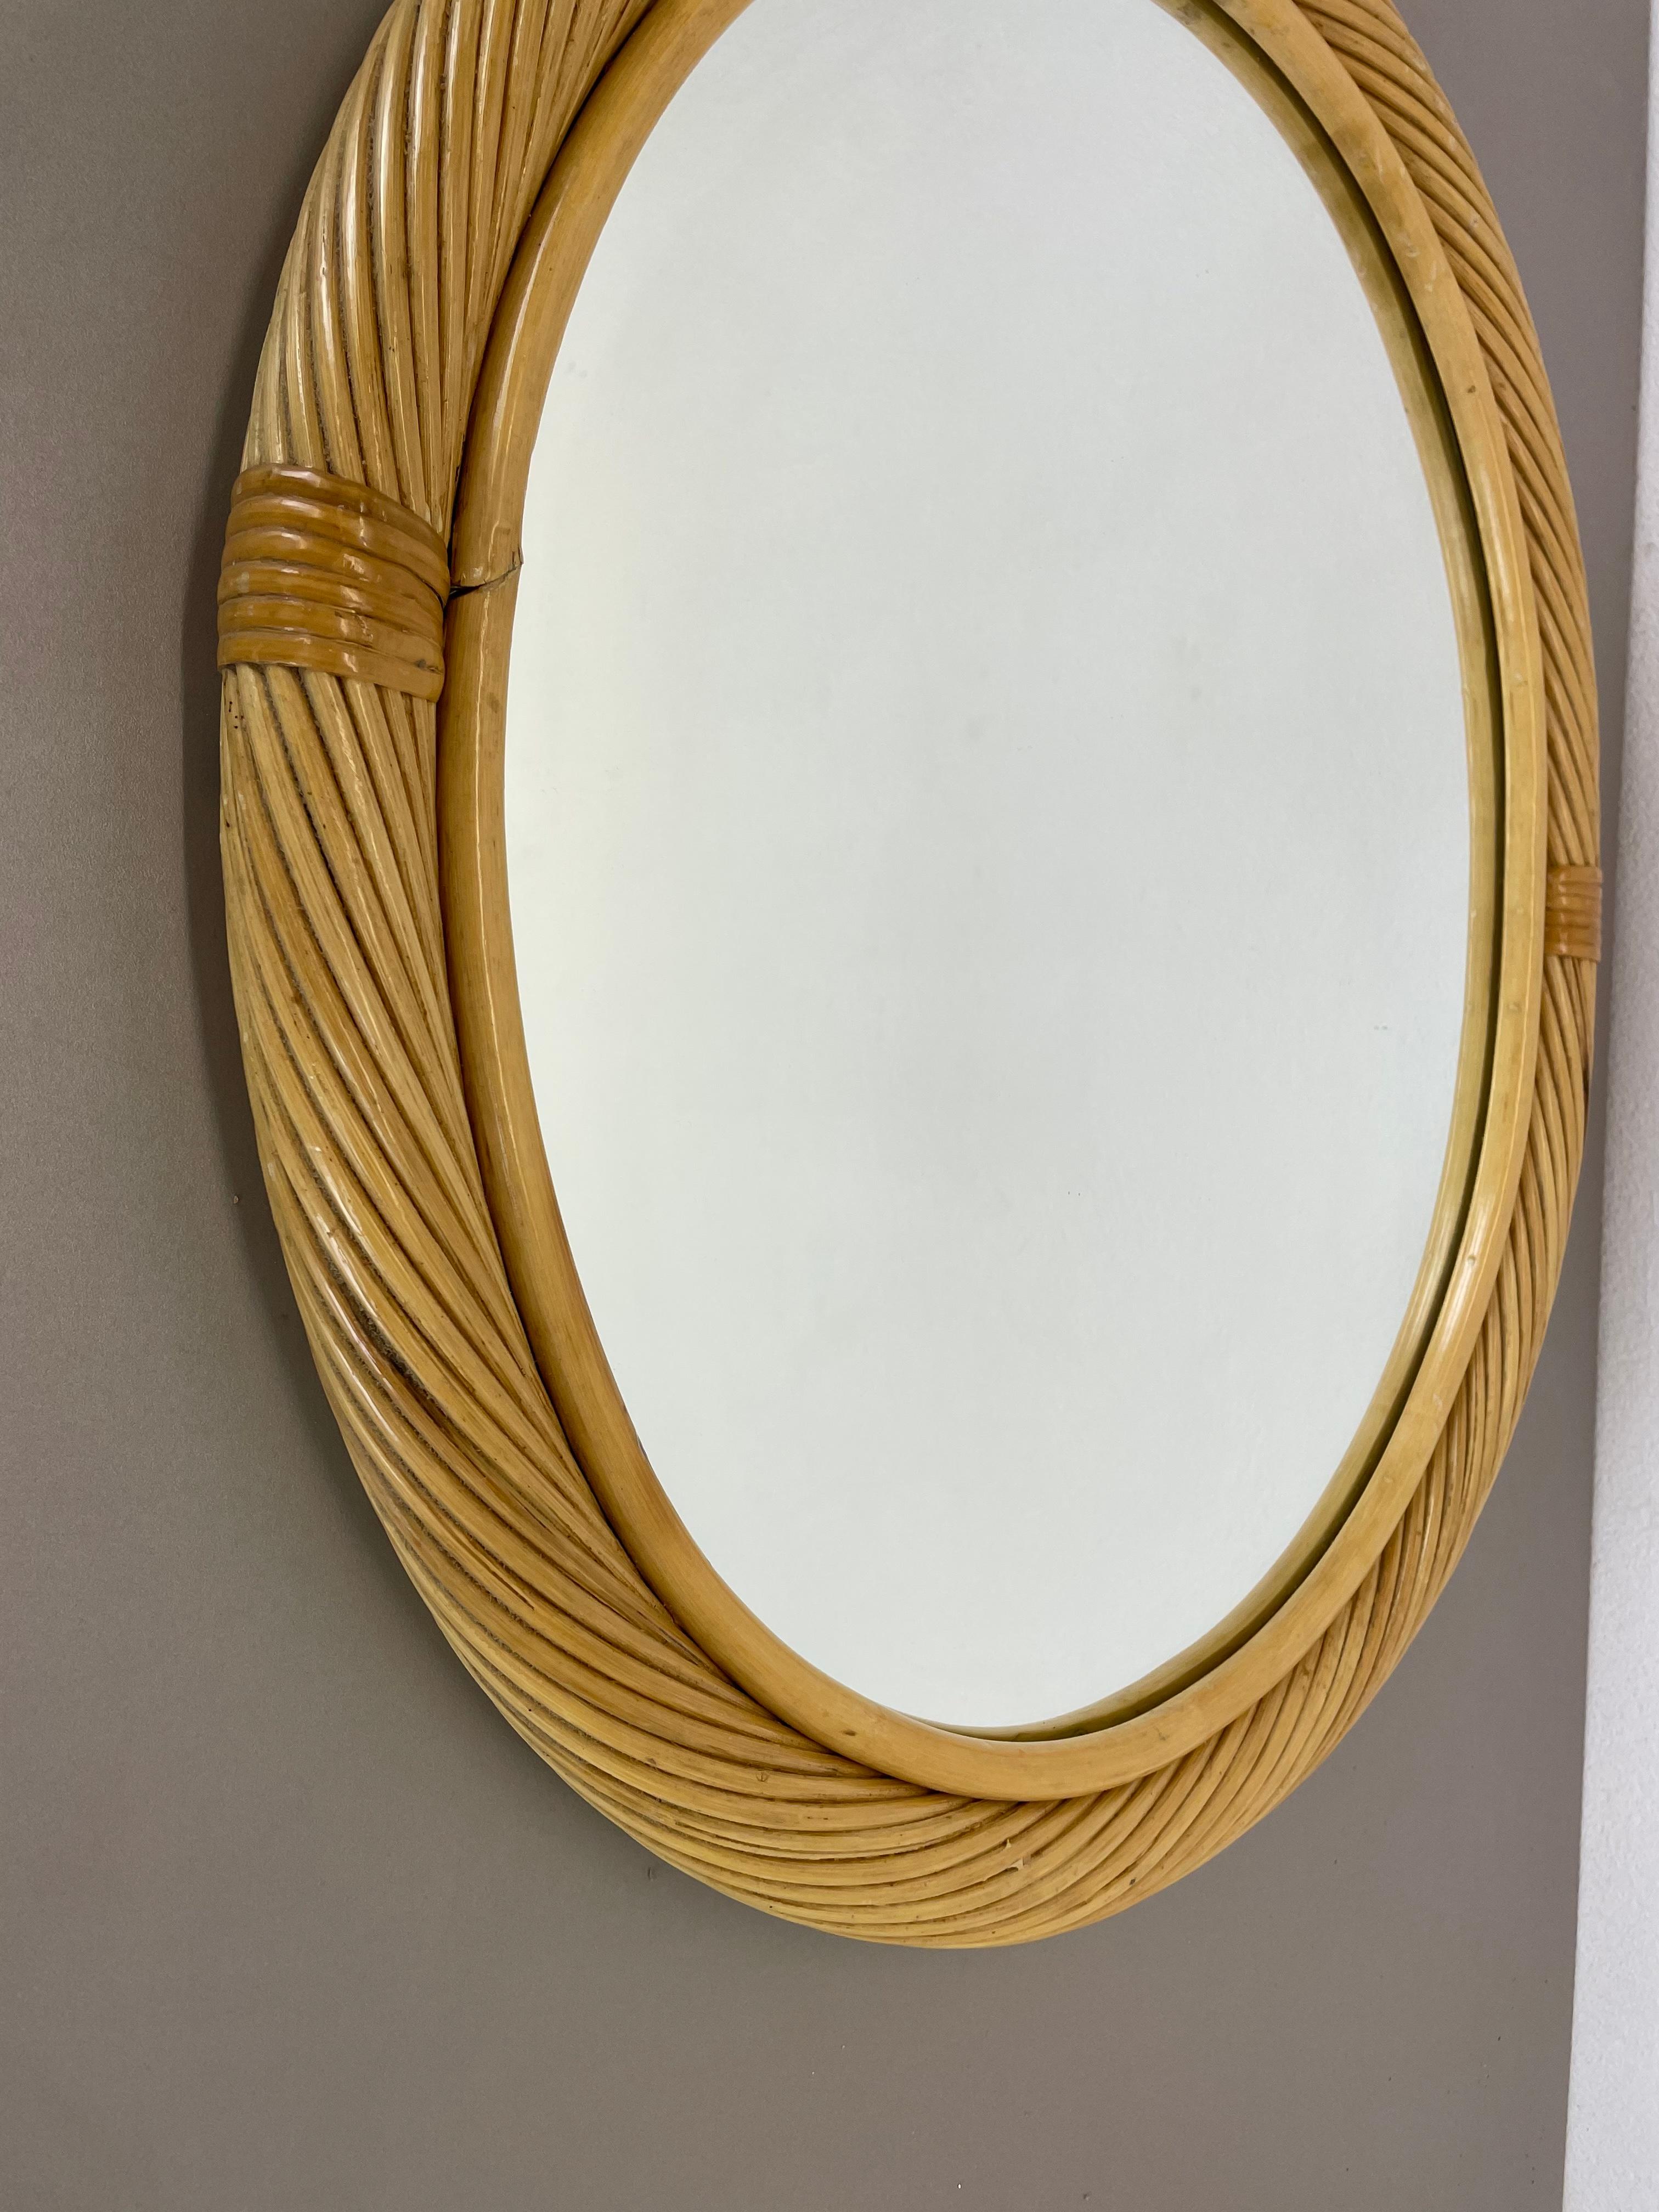 20th Century Large Rattan Rotin Wall Mirror in Crespi Albini Style, Italy, 1970s For Sale